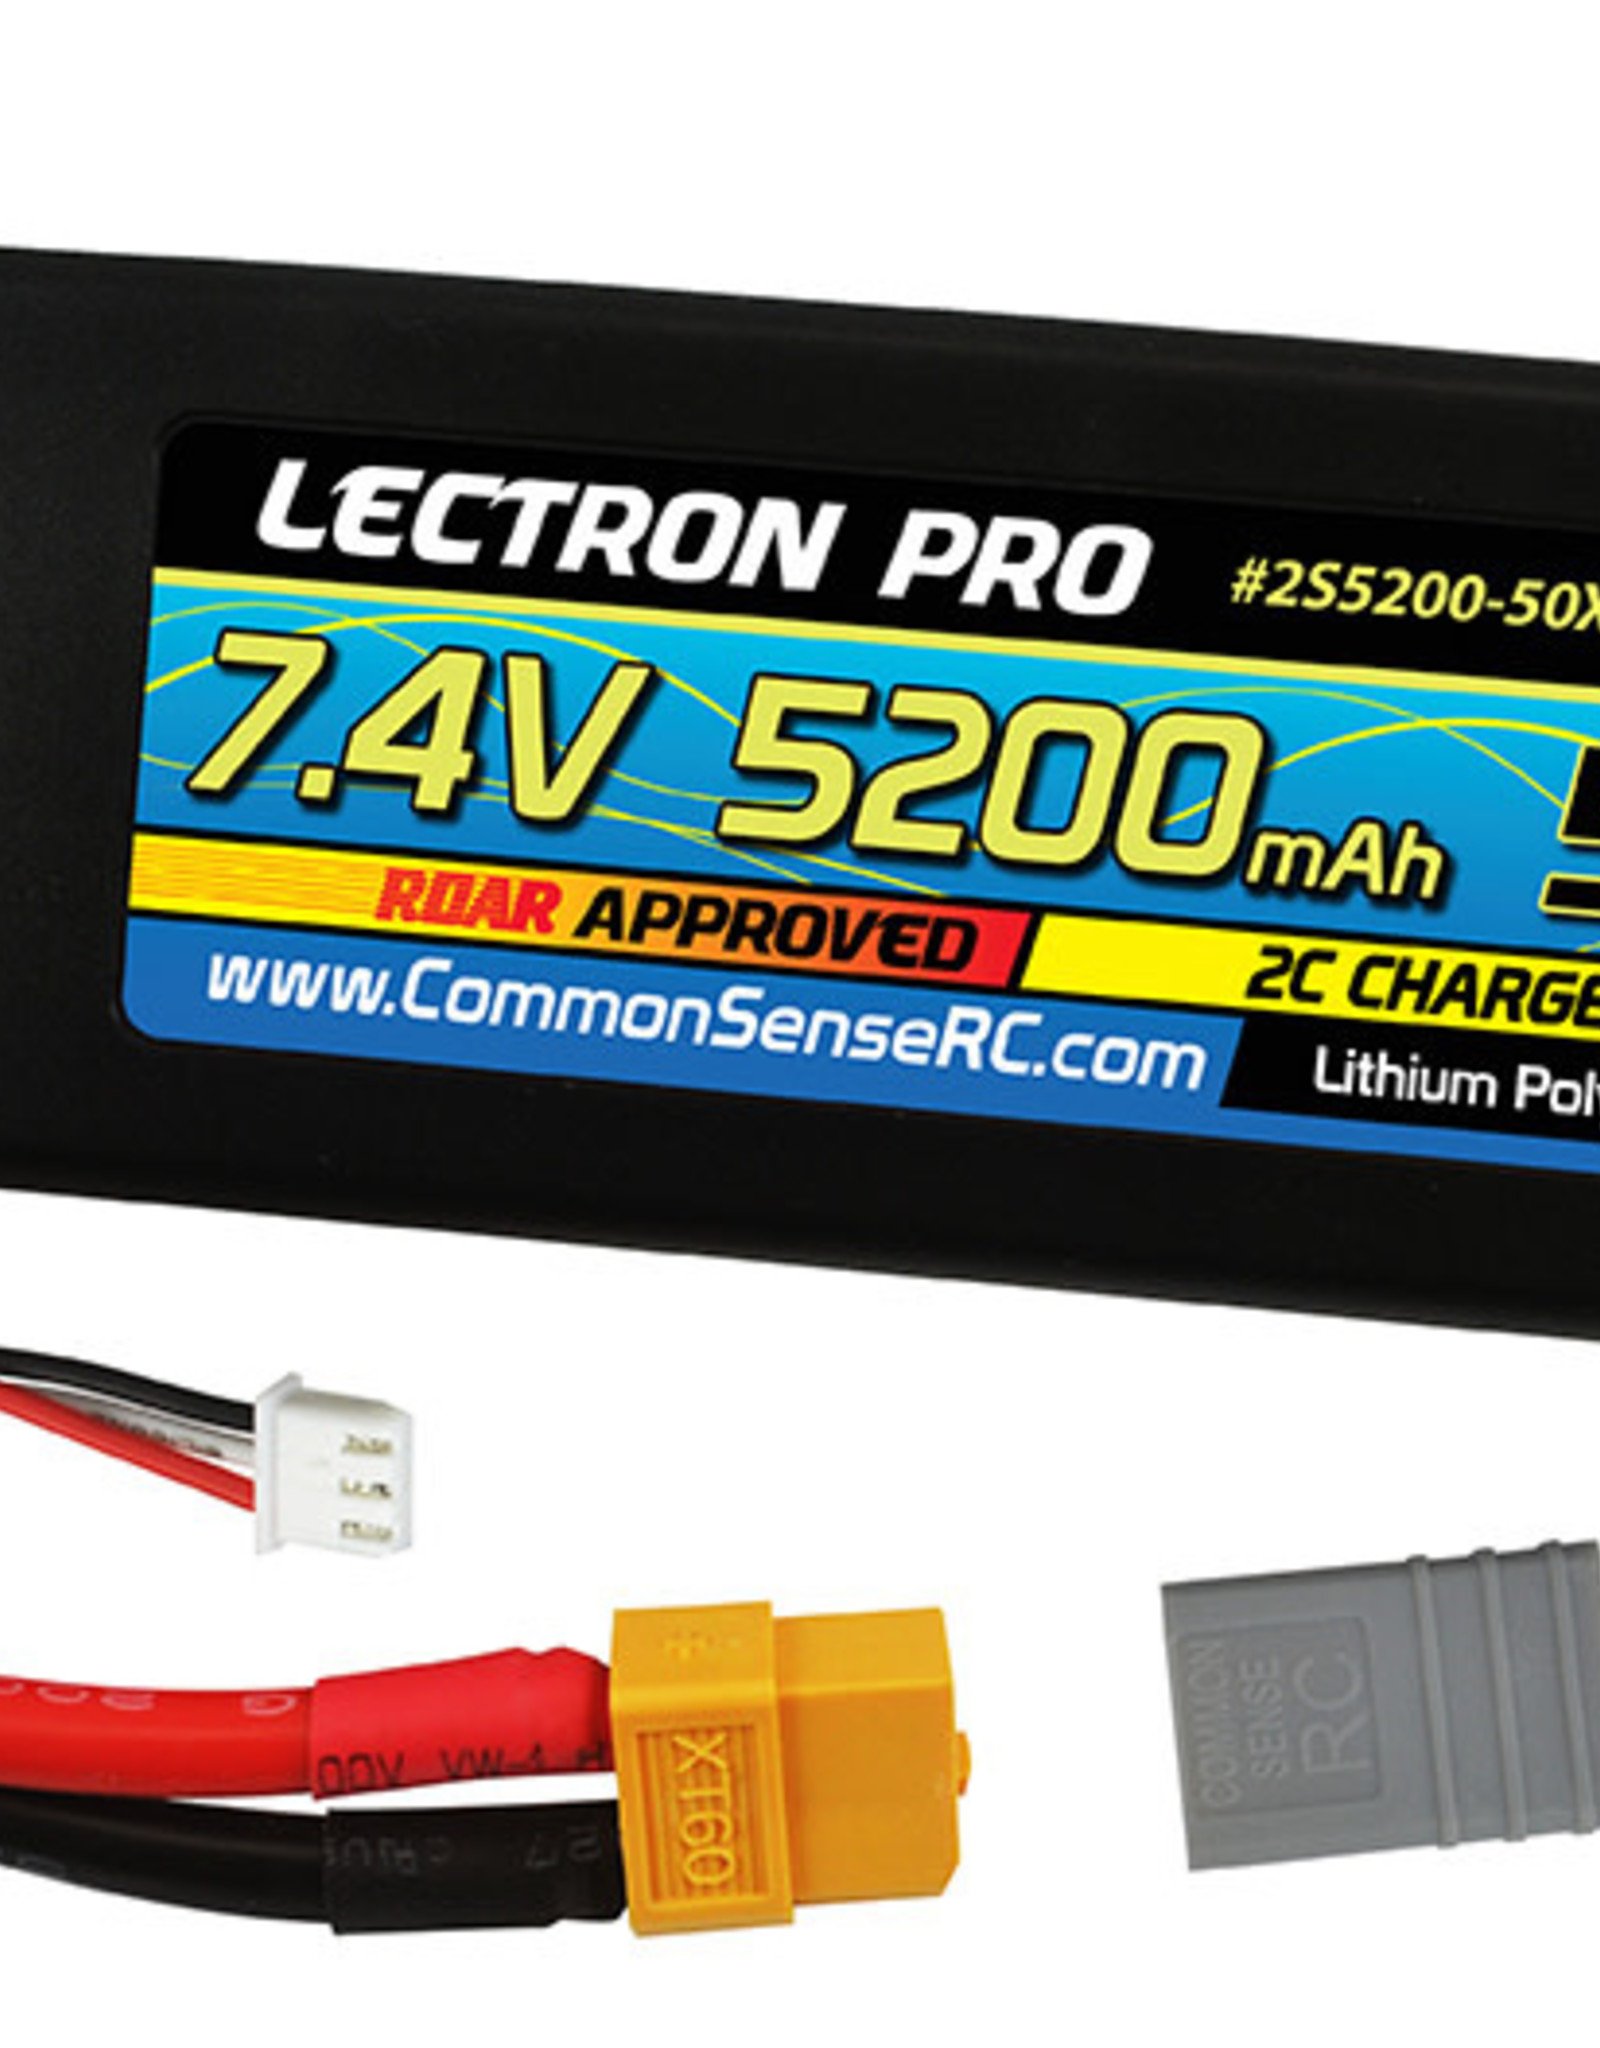 Common Sense Rc Lectron Pro 7.4V 5200mAh 50C Lipo Battery with XT60 Connector + CSRC adapter for XT60 batteries to popular RC vehicles